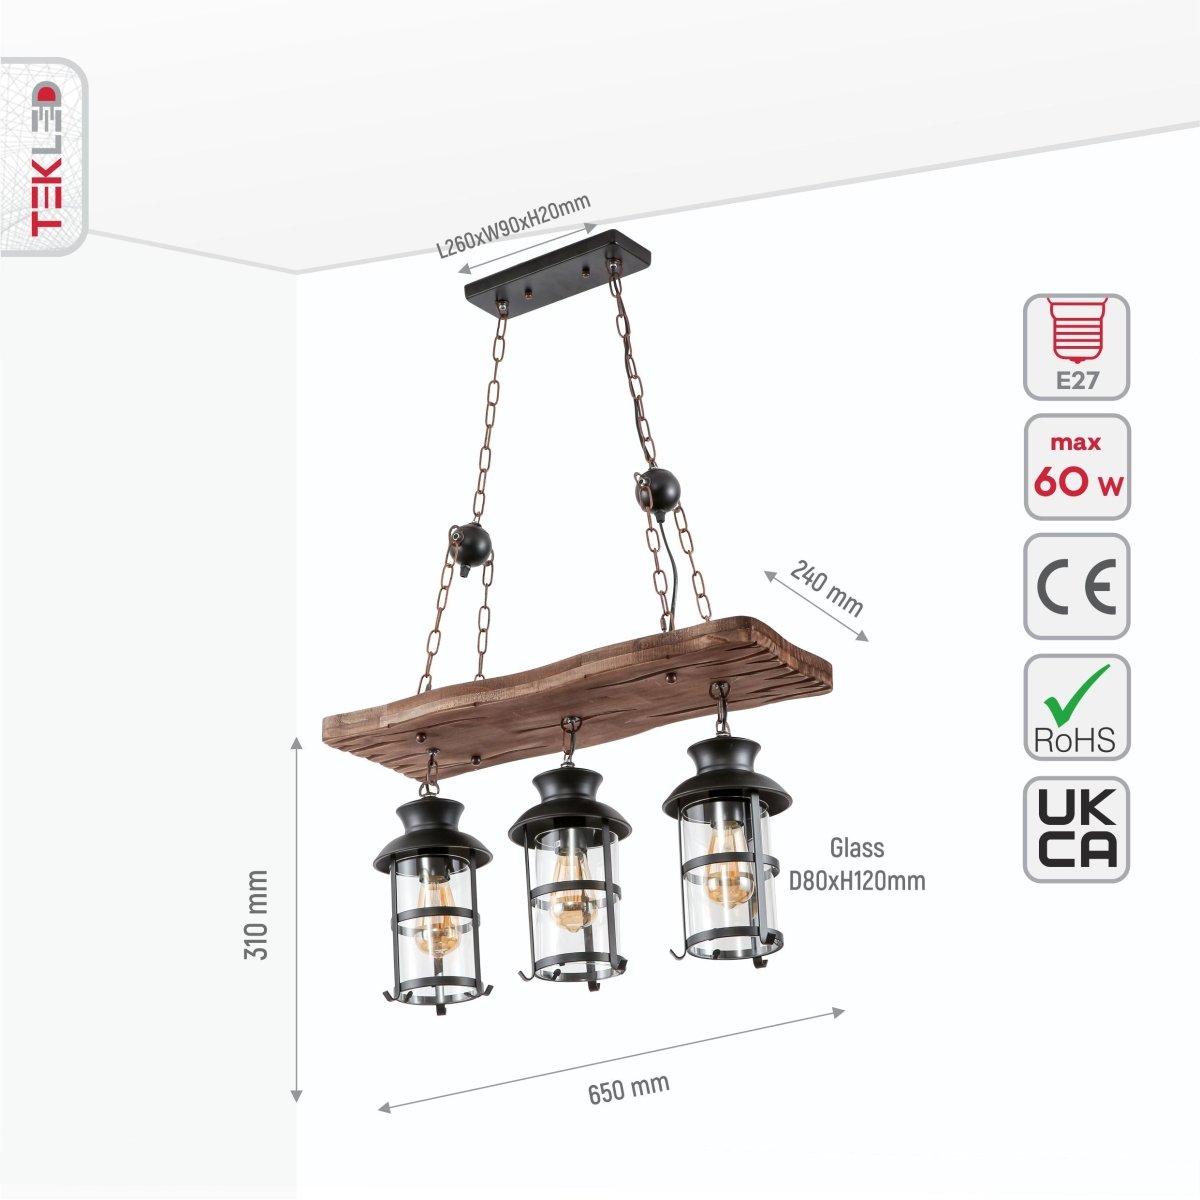 Size and specs of Board Iron and Wood Glass Cylinder Shade Island Chandelier Light 3xE27 | TEKLED 159-17840